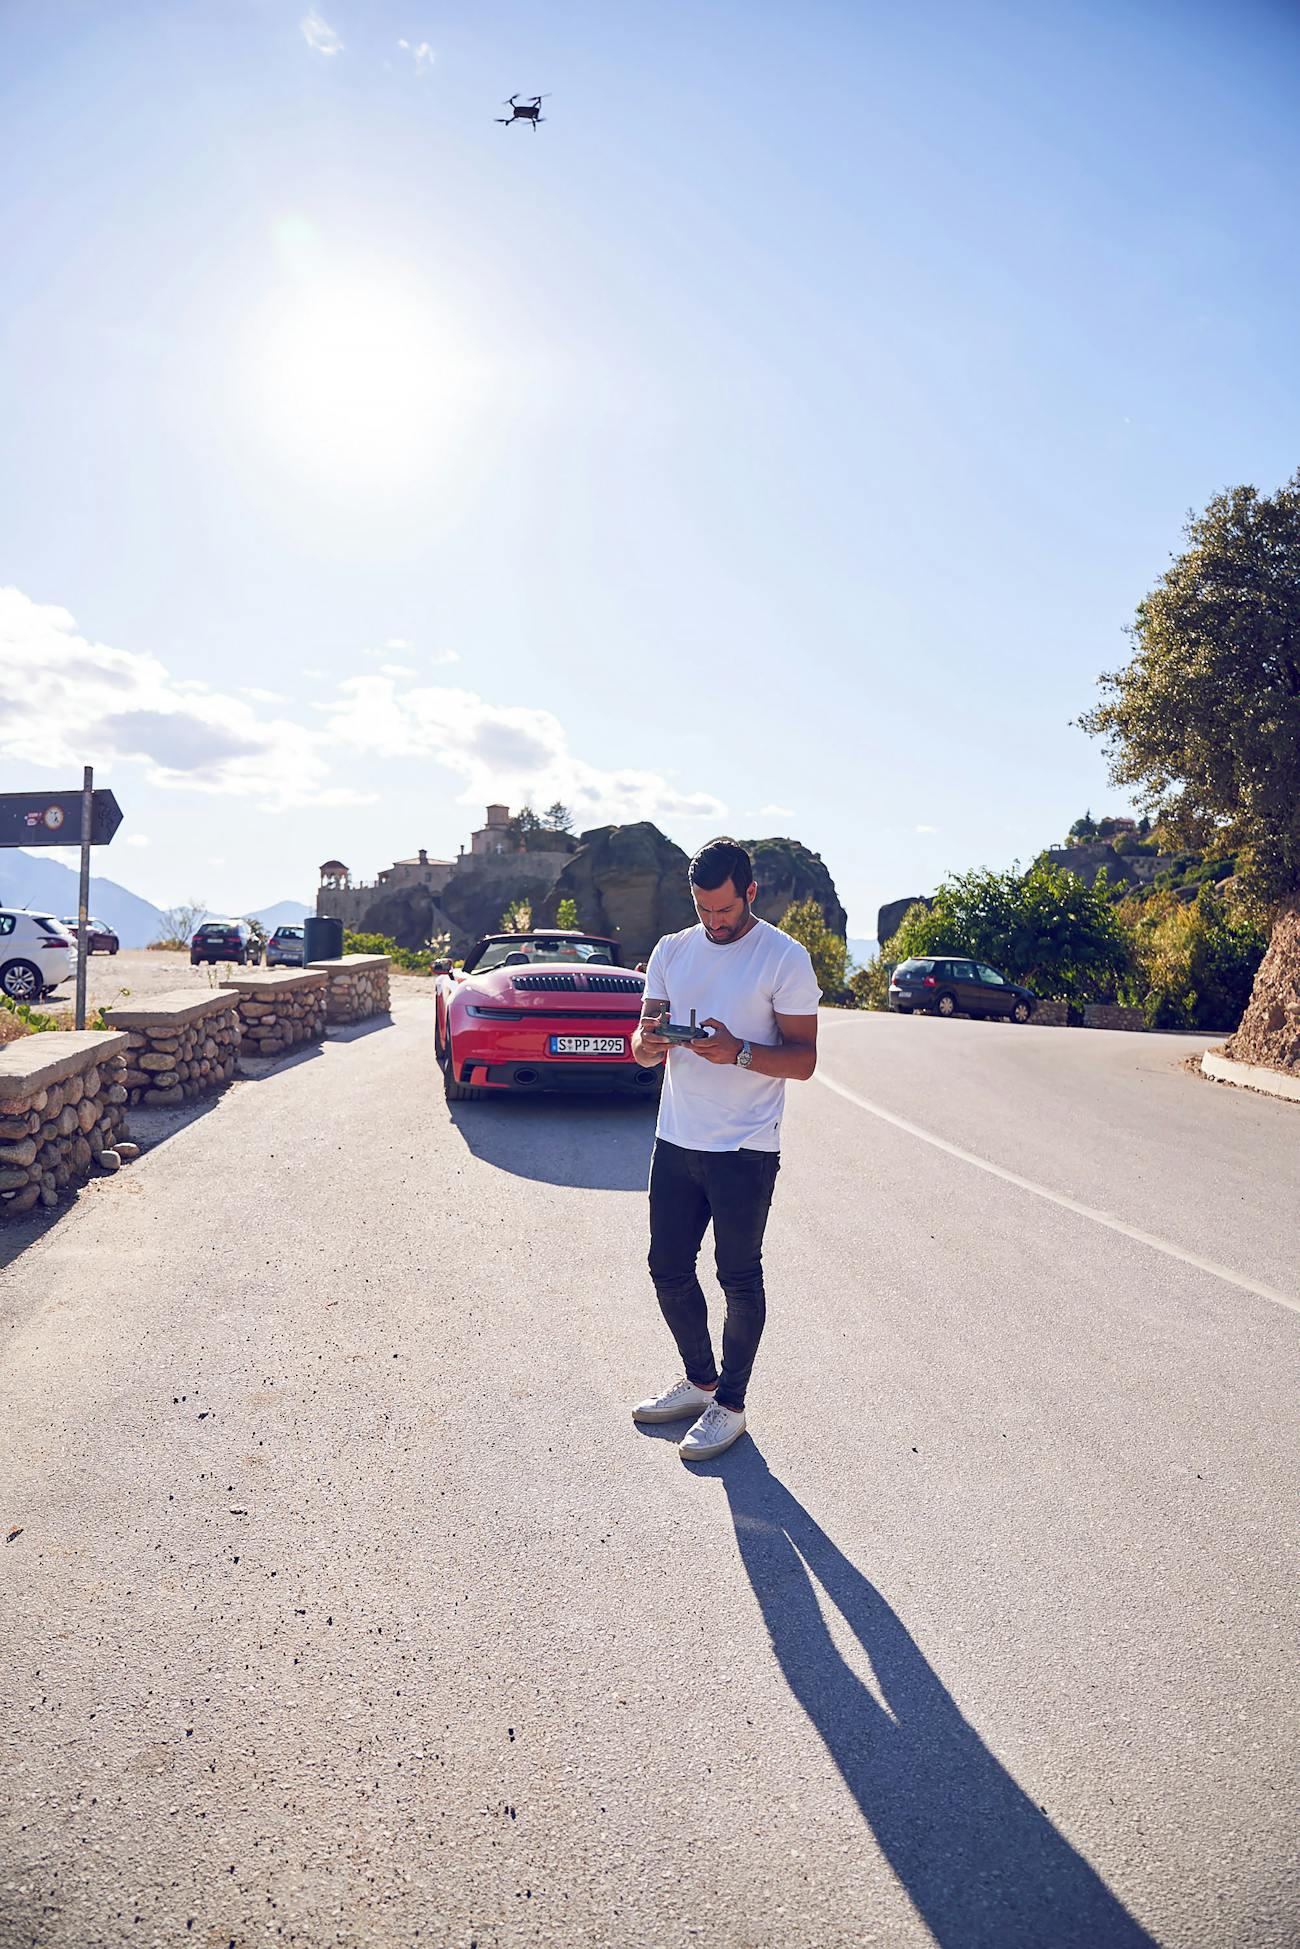 Costas Spathis with his drone and the Porsche 911 Cabriolet